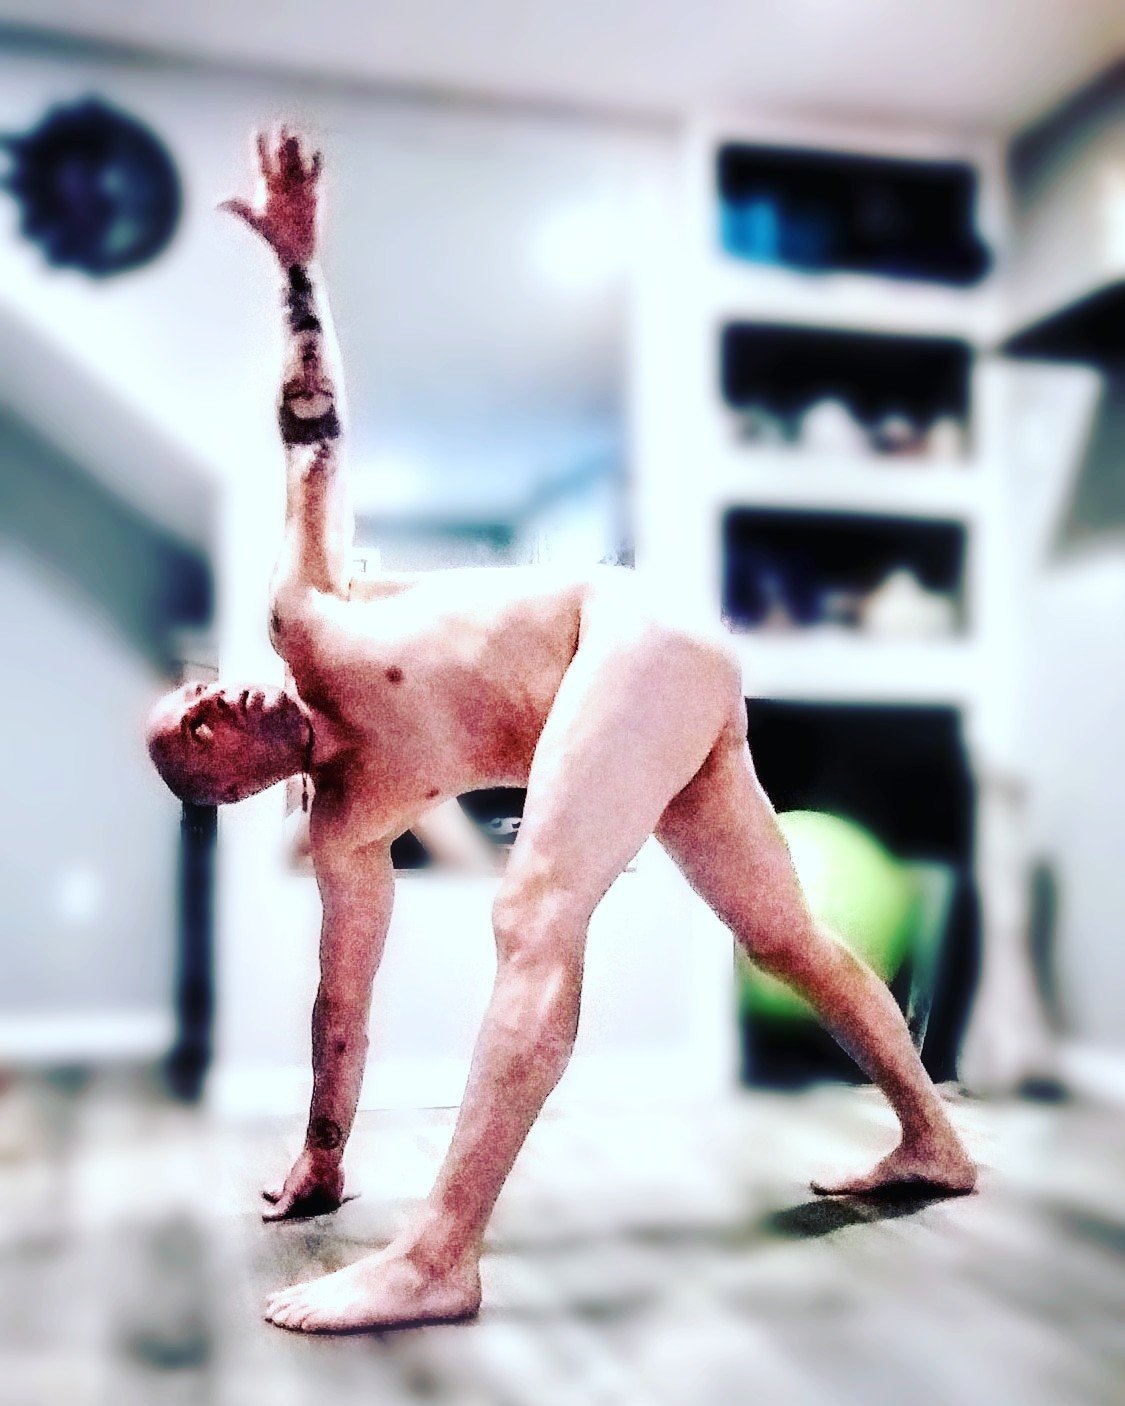 Photo by ArtOfNakedYoga with the username @ArtOfNakedYoga, who is a verified user,  May 30, 2019 at 11:11 AM. The post is about the topic Yoga in the nude and the text says '#yoga #nudeyoga #nakedyoga'